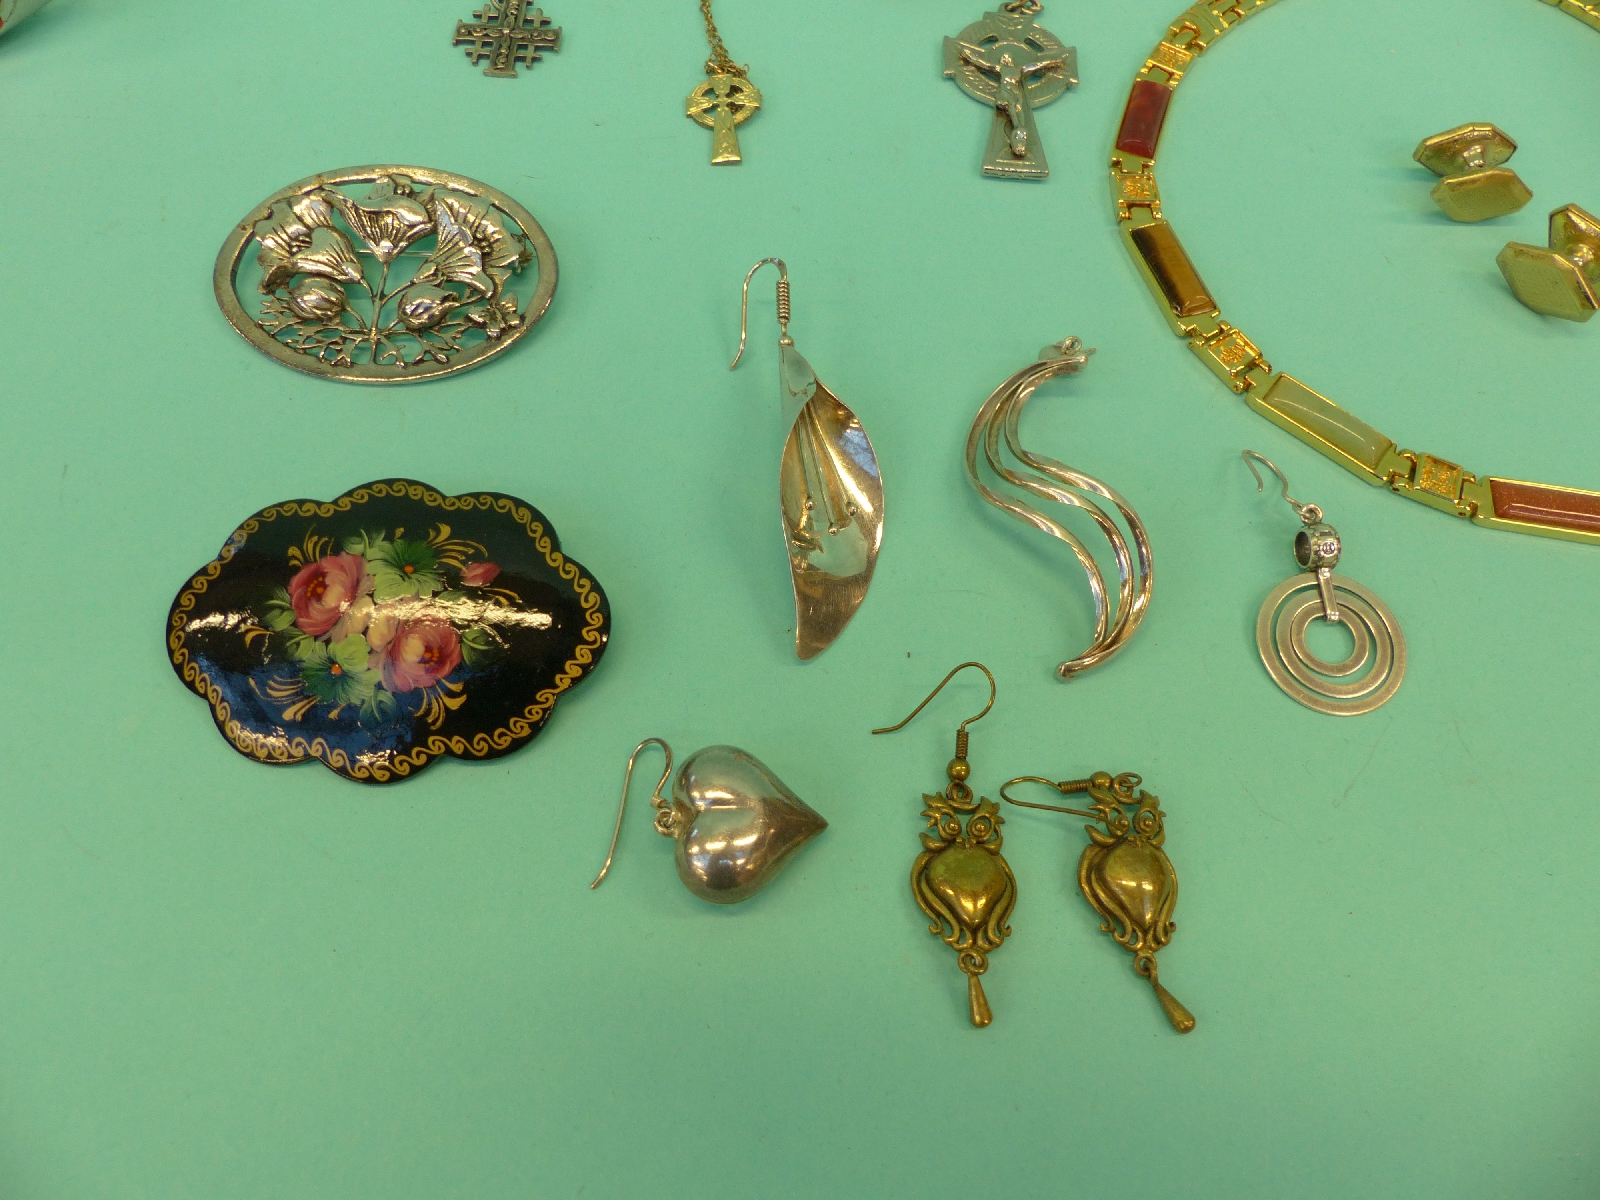 A collection of costume jewellery including a lacquer brooch, silver earrings, - Image 3 of 5